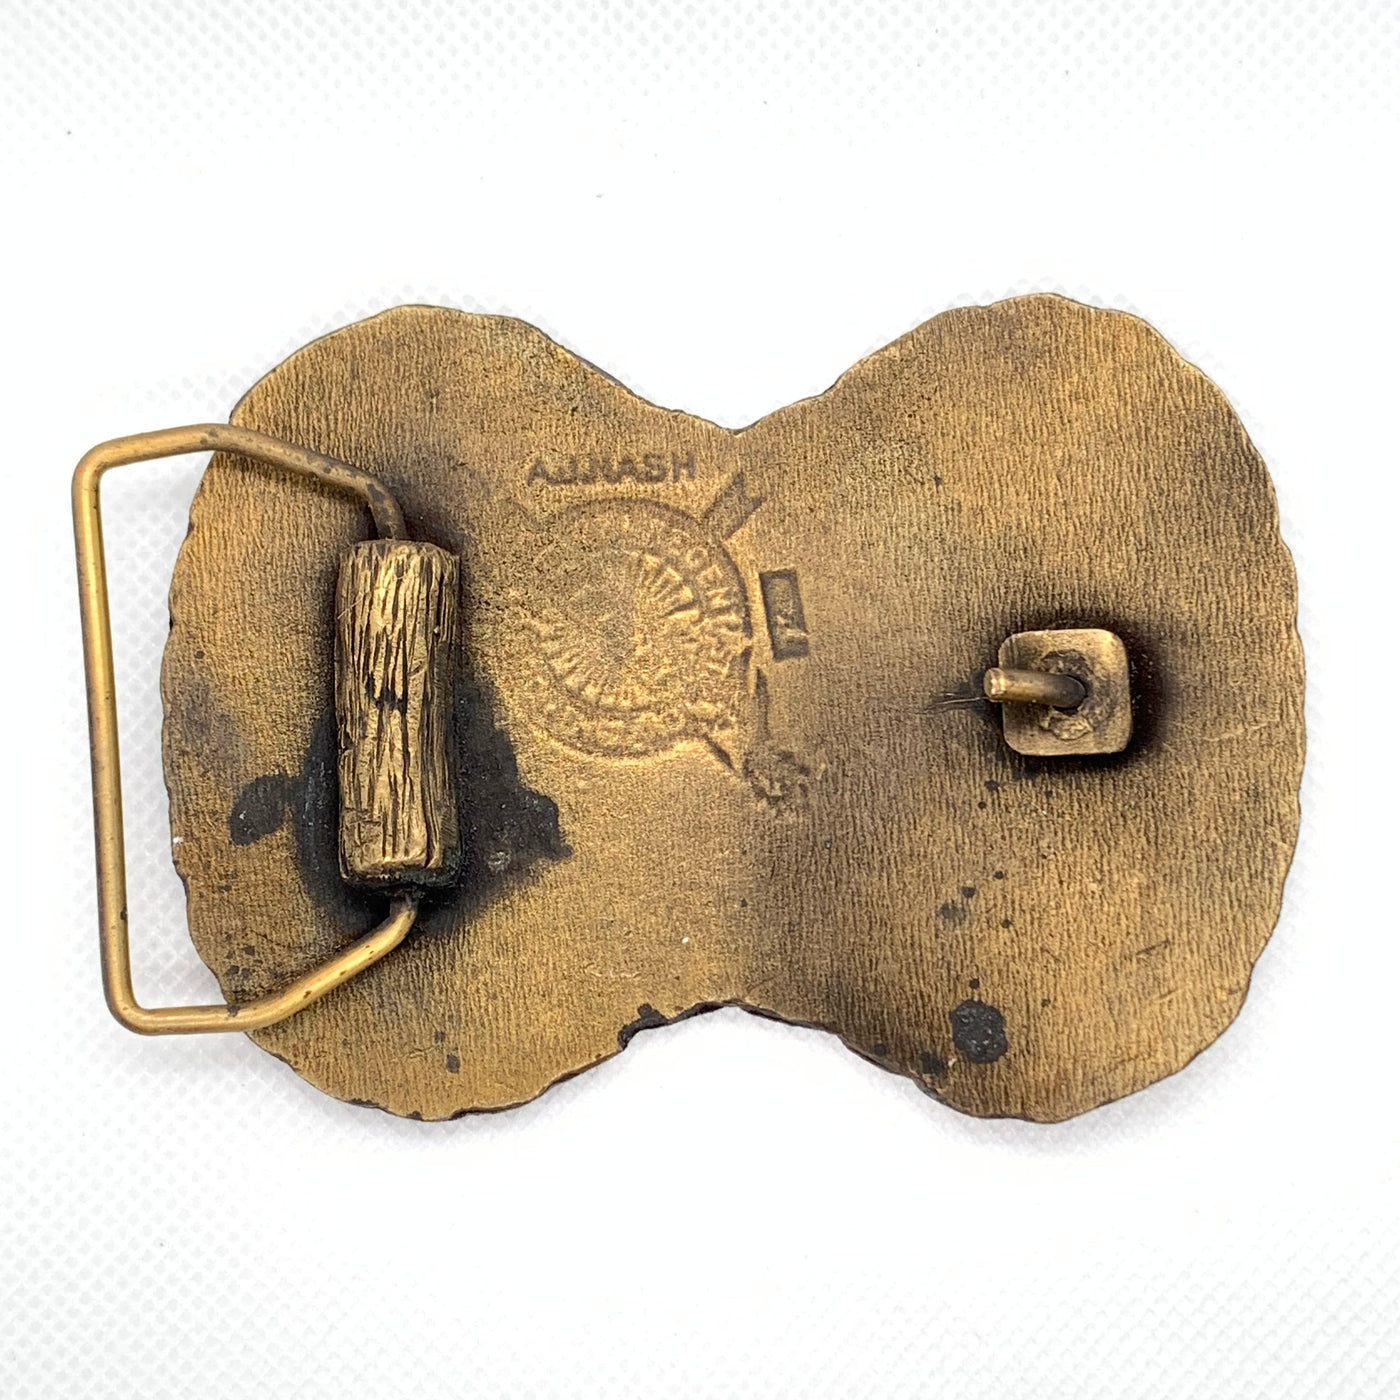 Browse our gallery of pre-owned mechanical belt buckles